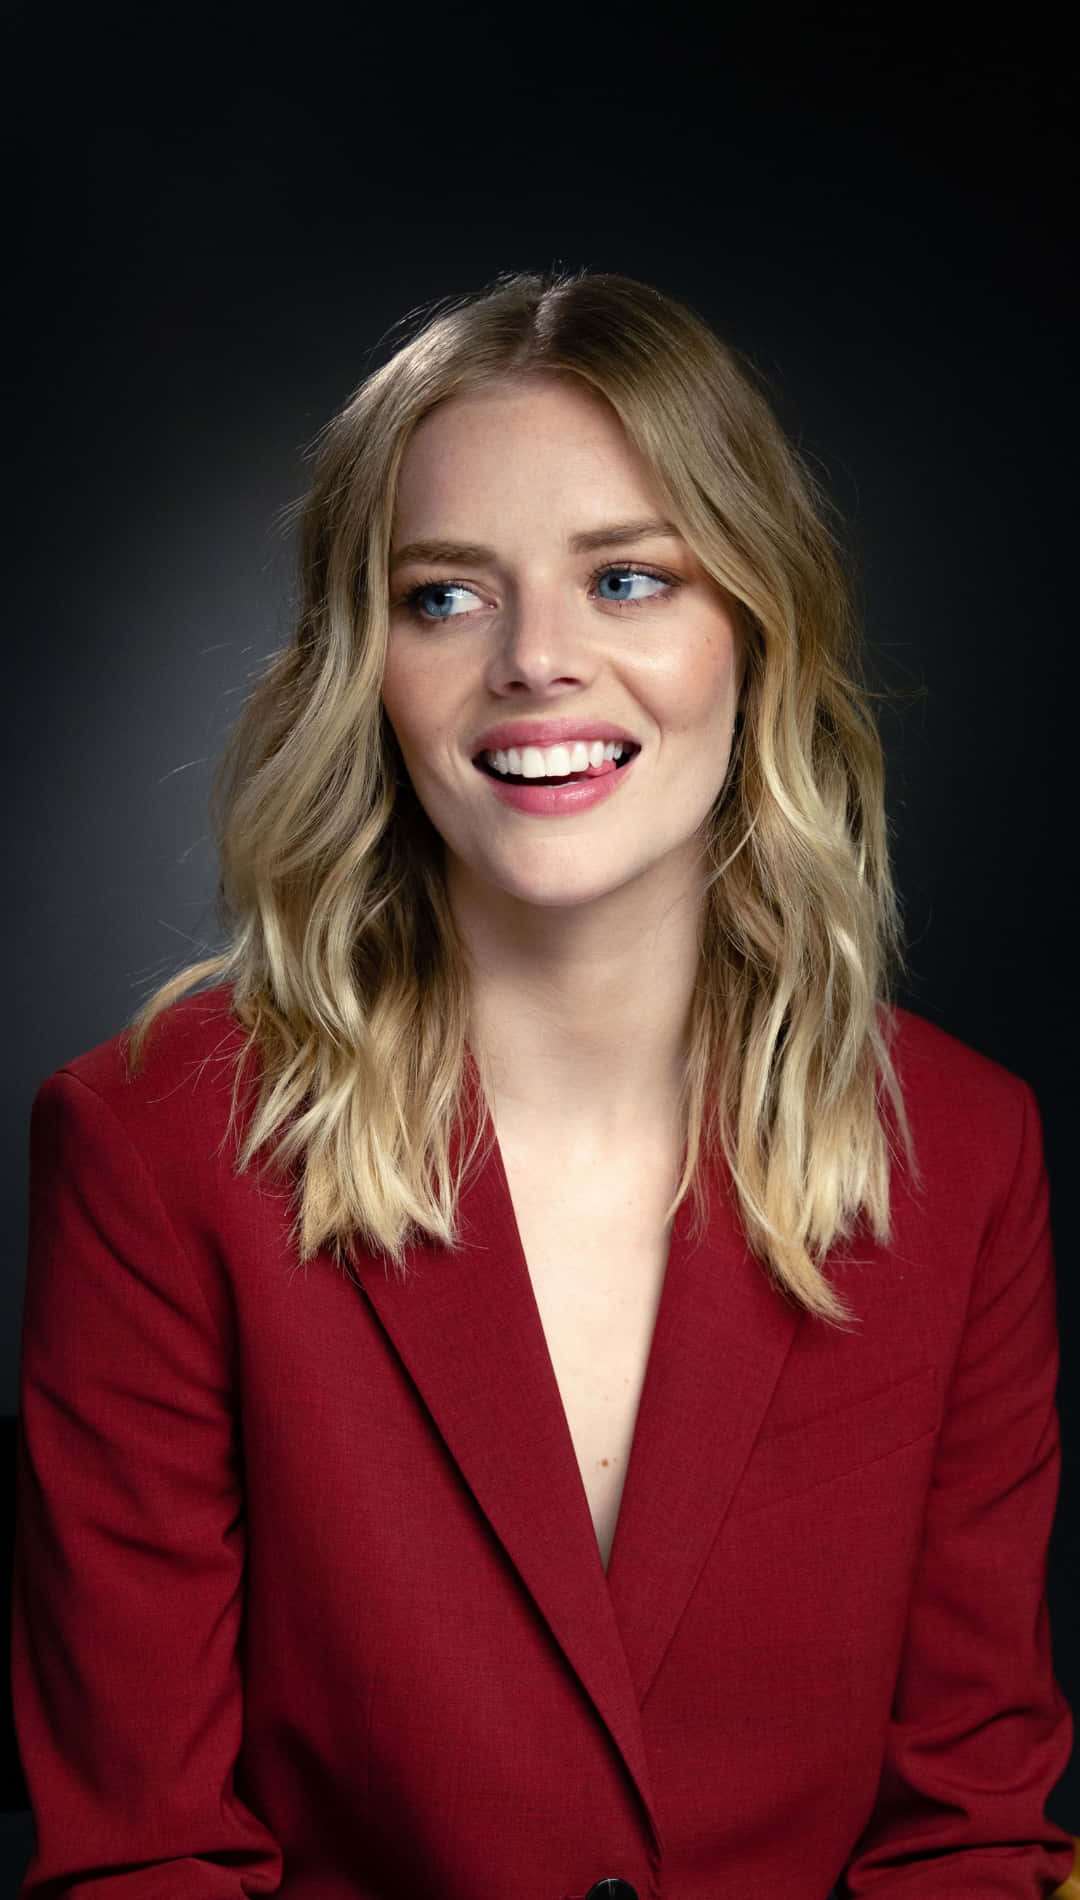 Smiling Womanin Red Blazer Background